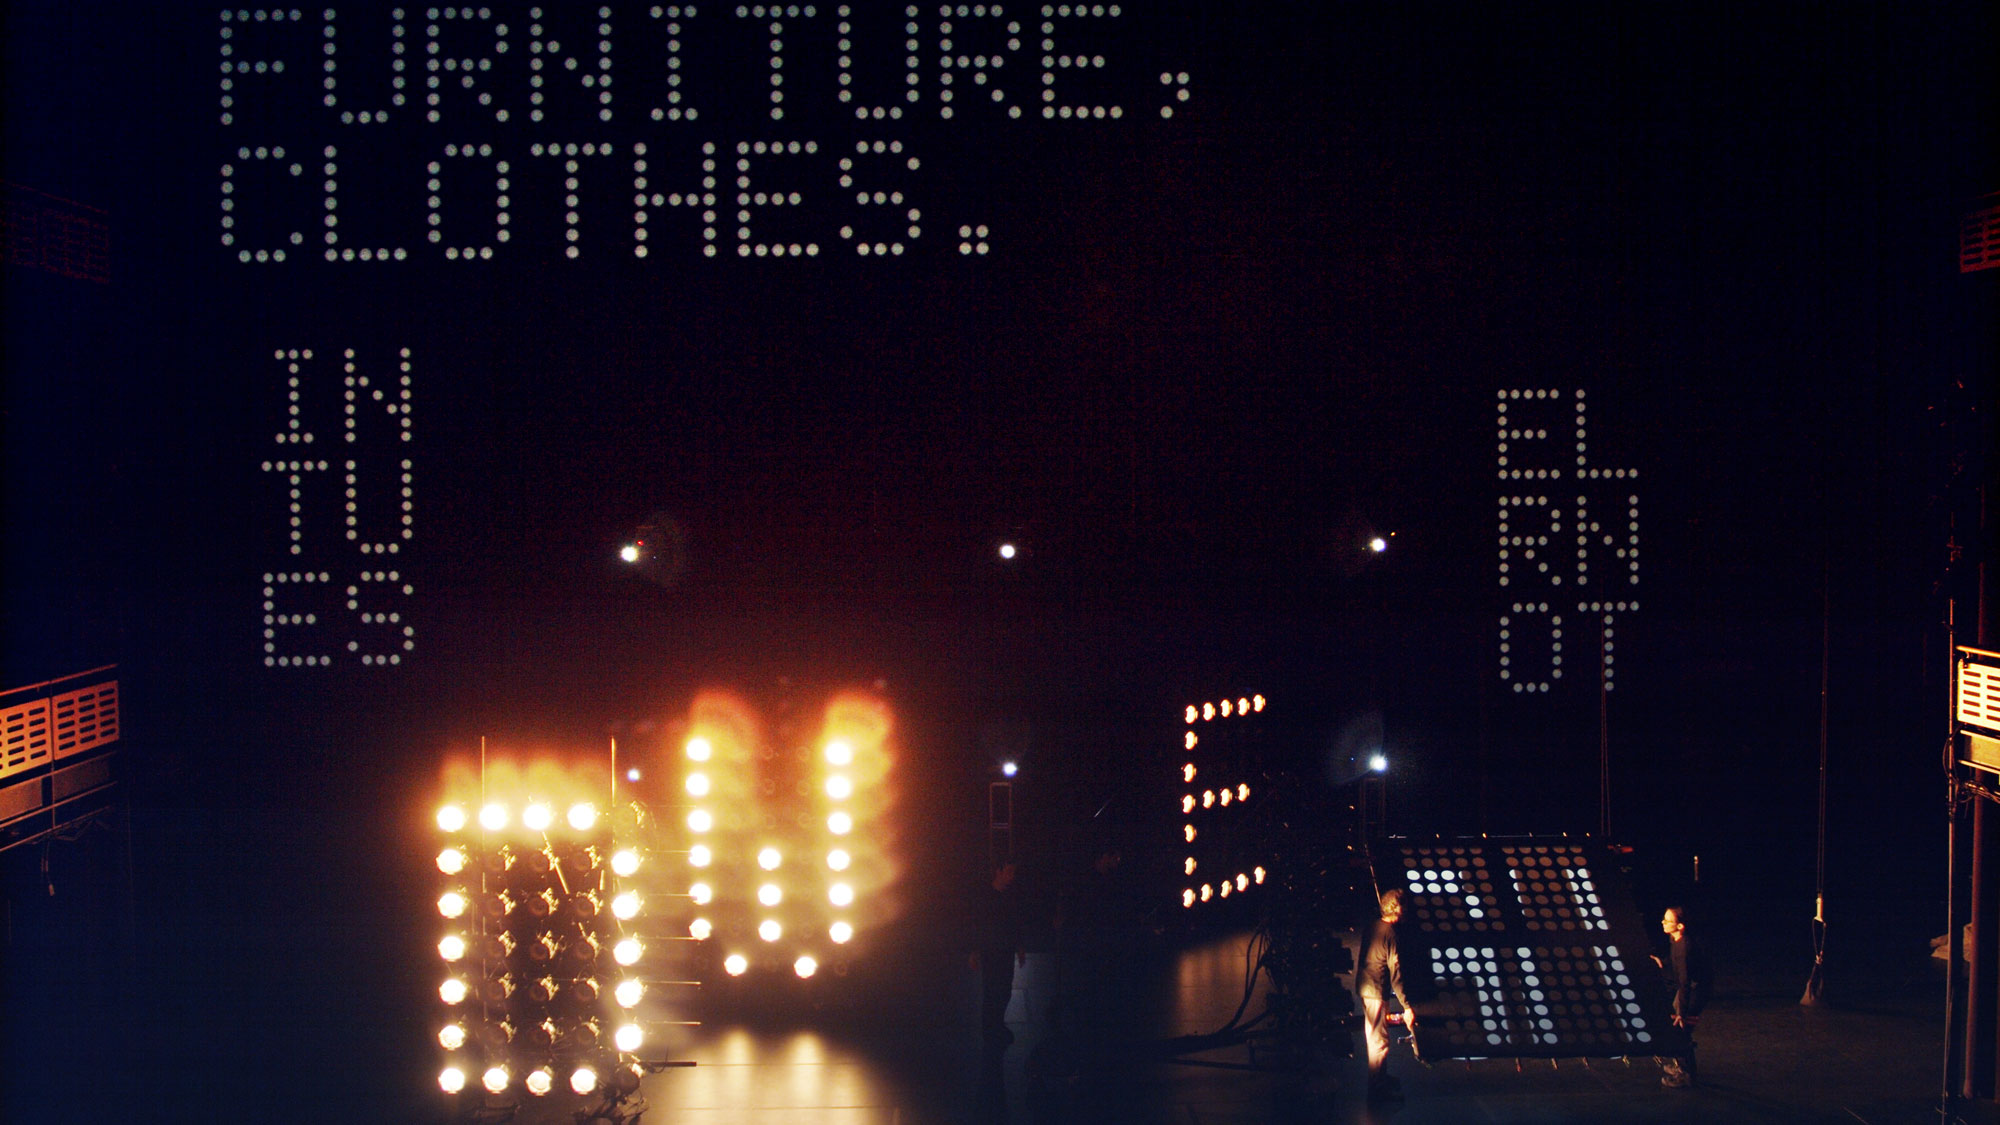 words spelled out by lights in a large black studio: furniture, clothes. in tu es.